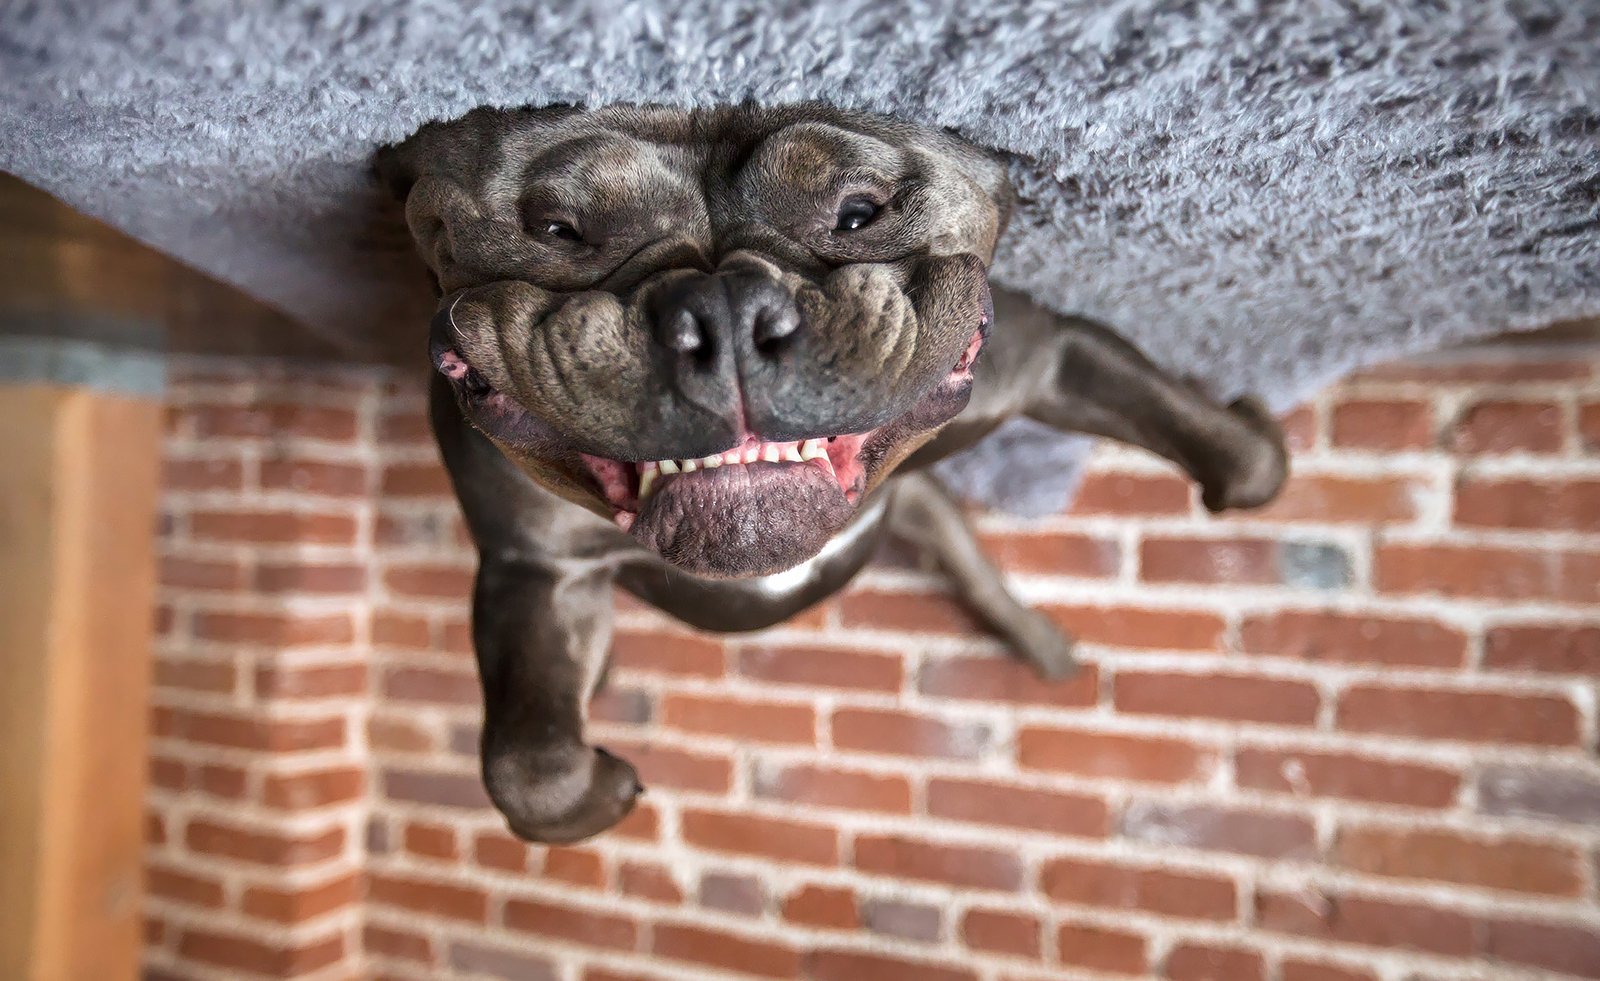 A playful dog, appearing upside down, is seen with its mouth open and teeth showing while lying on a carpeted surface. In the background, an exposed brick wall adds to the lively scene.